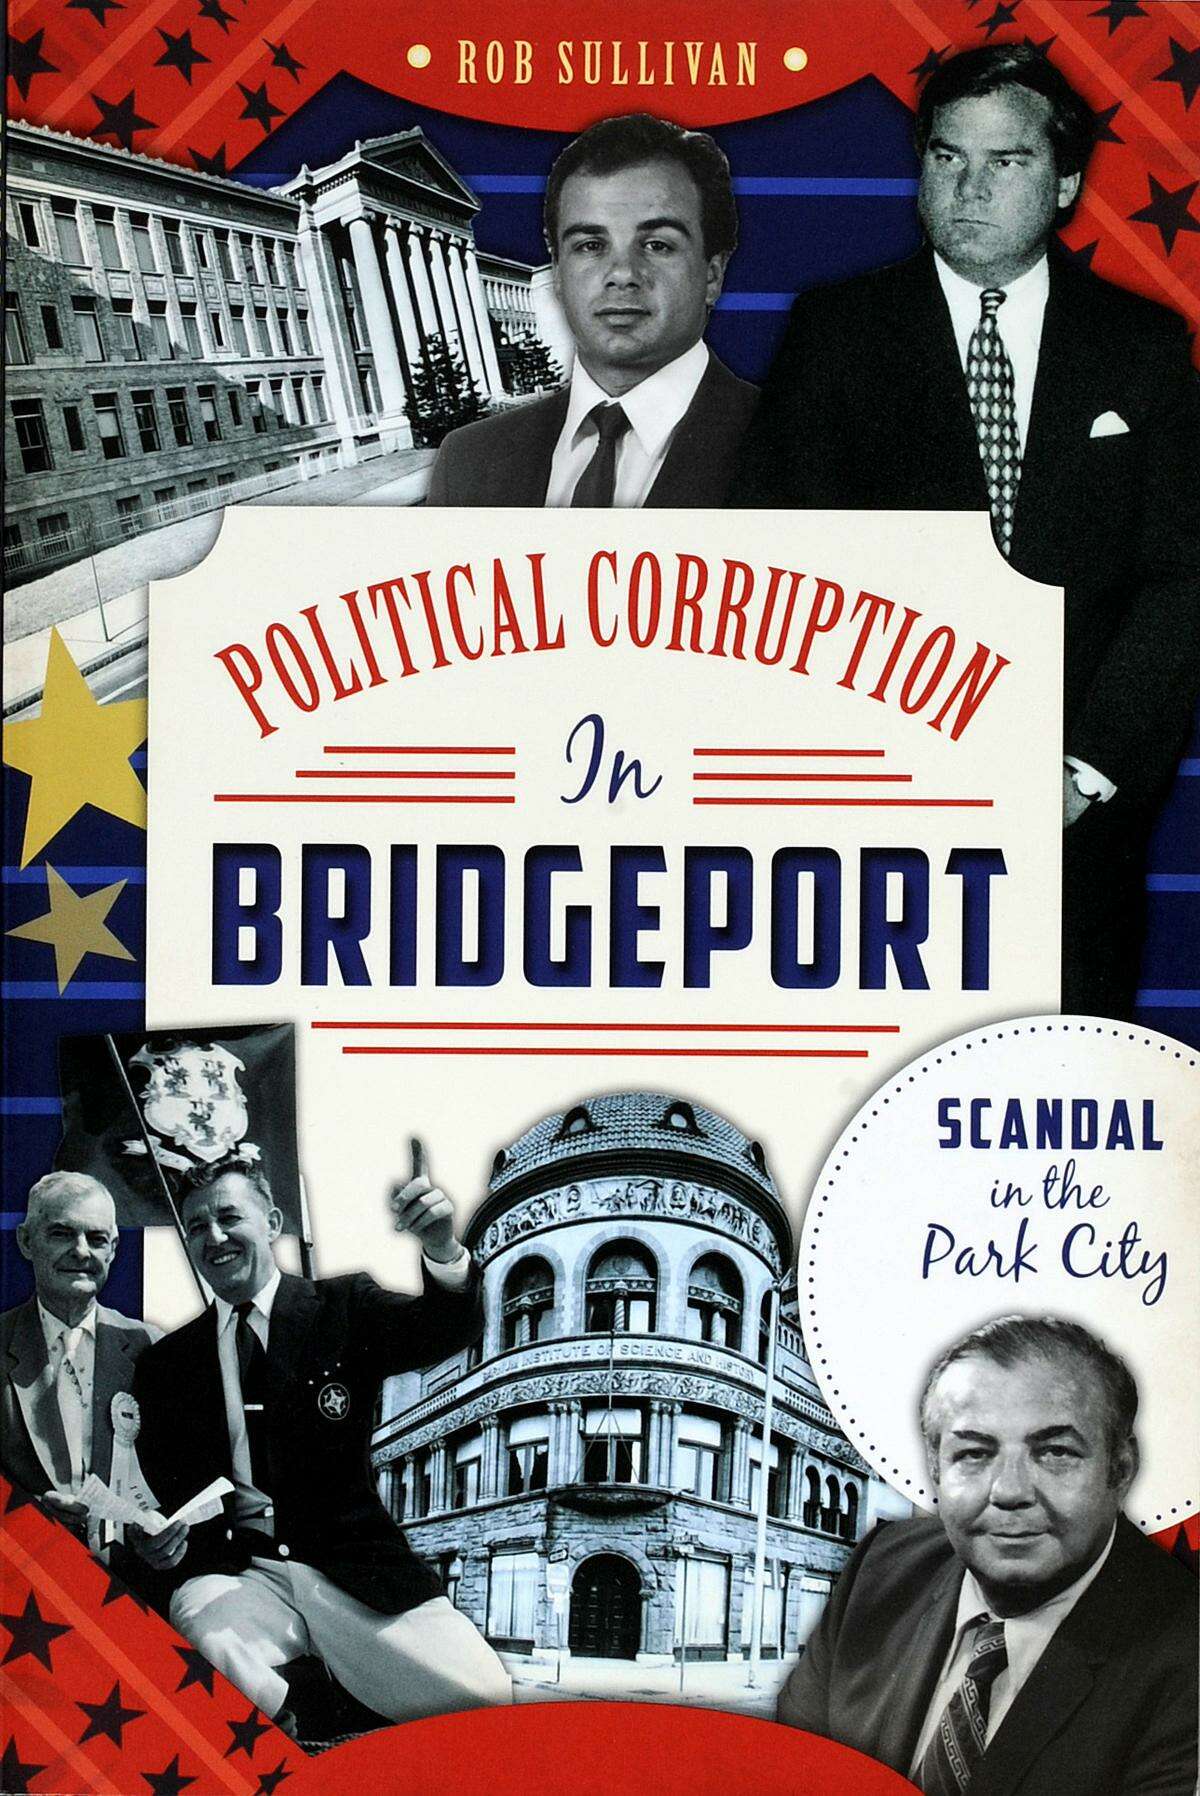 "Political Corruption in Bridgeport, Scandal in the Park City" by Rob Sullivan